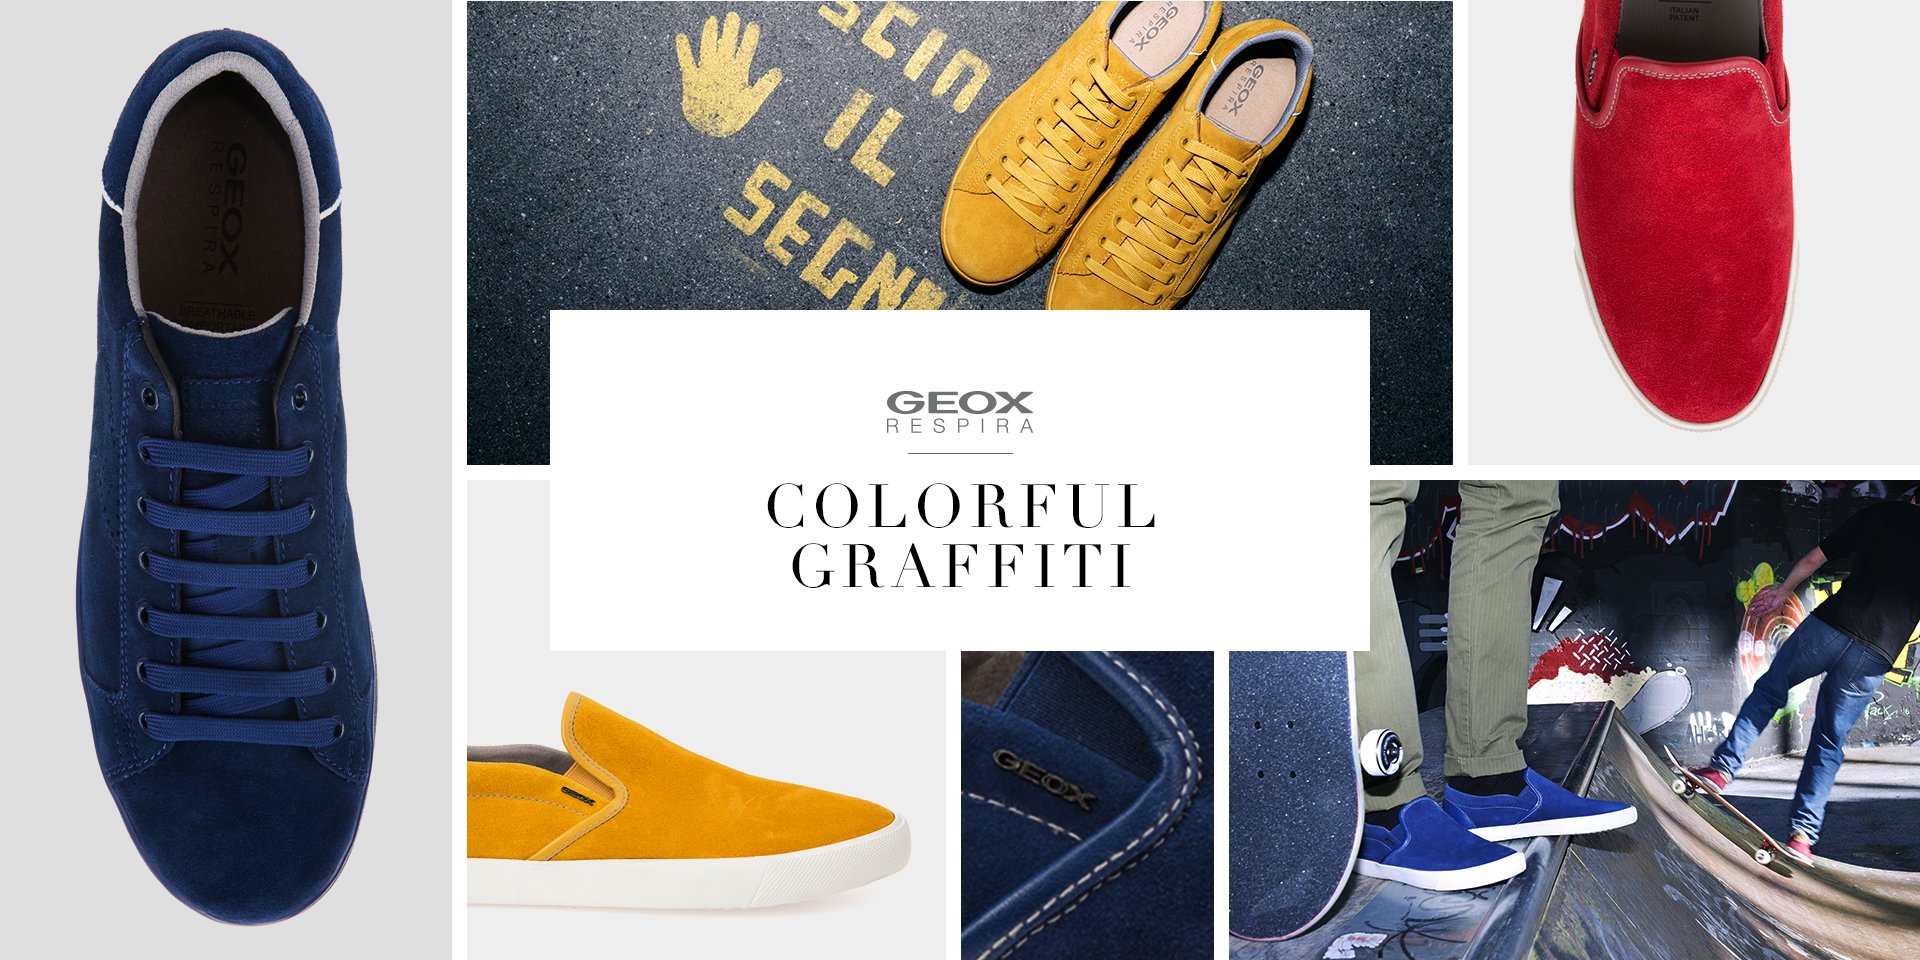 repetir Despertar Cartero GEOX on Twitter: "Follow your passions and give a color touch to your  street #look ! https://t.co/DQw5XcfWHf #sneakers #style #Men  https://t.co/iinT0O9mGx" / Twitter